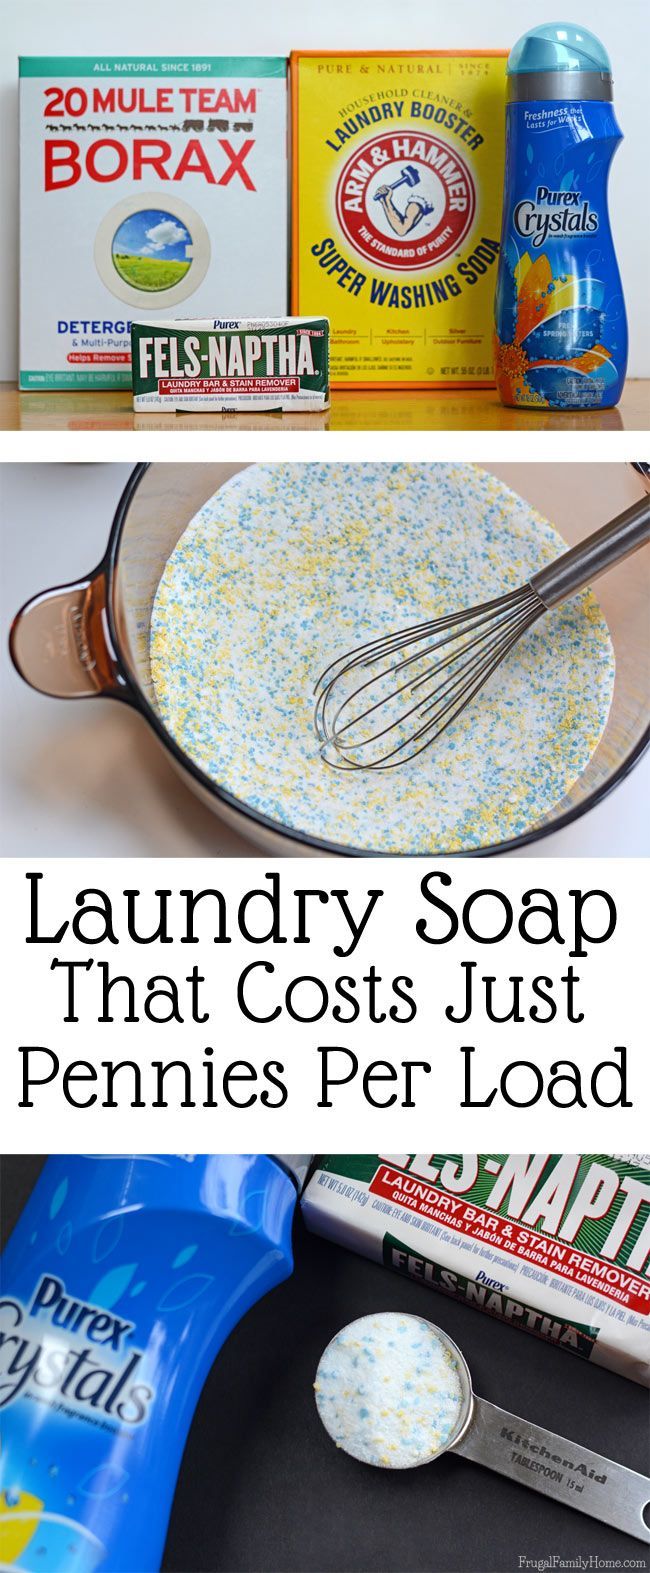 Making your own laundry detergent can really save you money. This diy laundry soap cost only pennies per load and cleans really well. I’ve been using it for years now and it worked great in my top loading washer and works just as good in my front loading washer too. -   25 diy soap laundry
 ideas